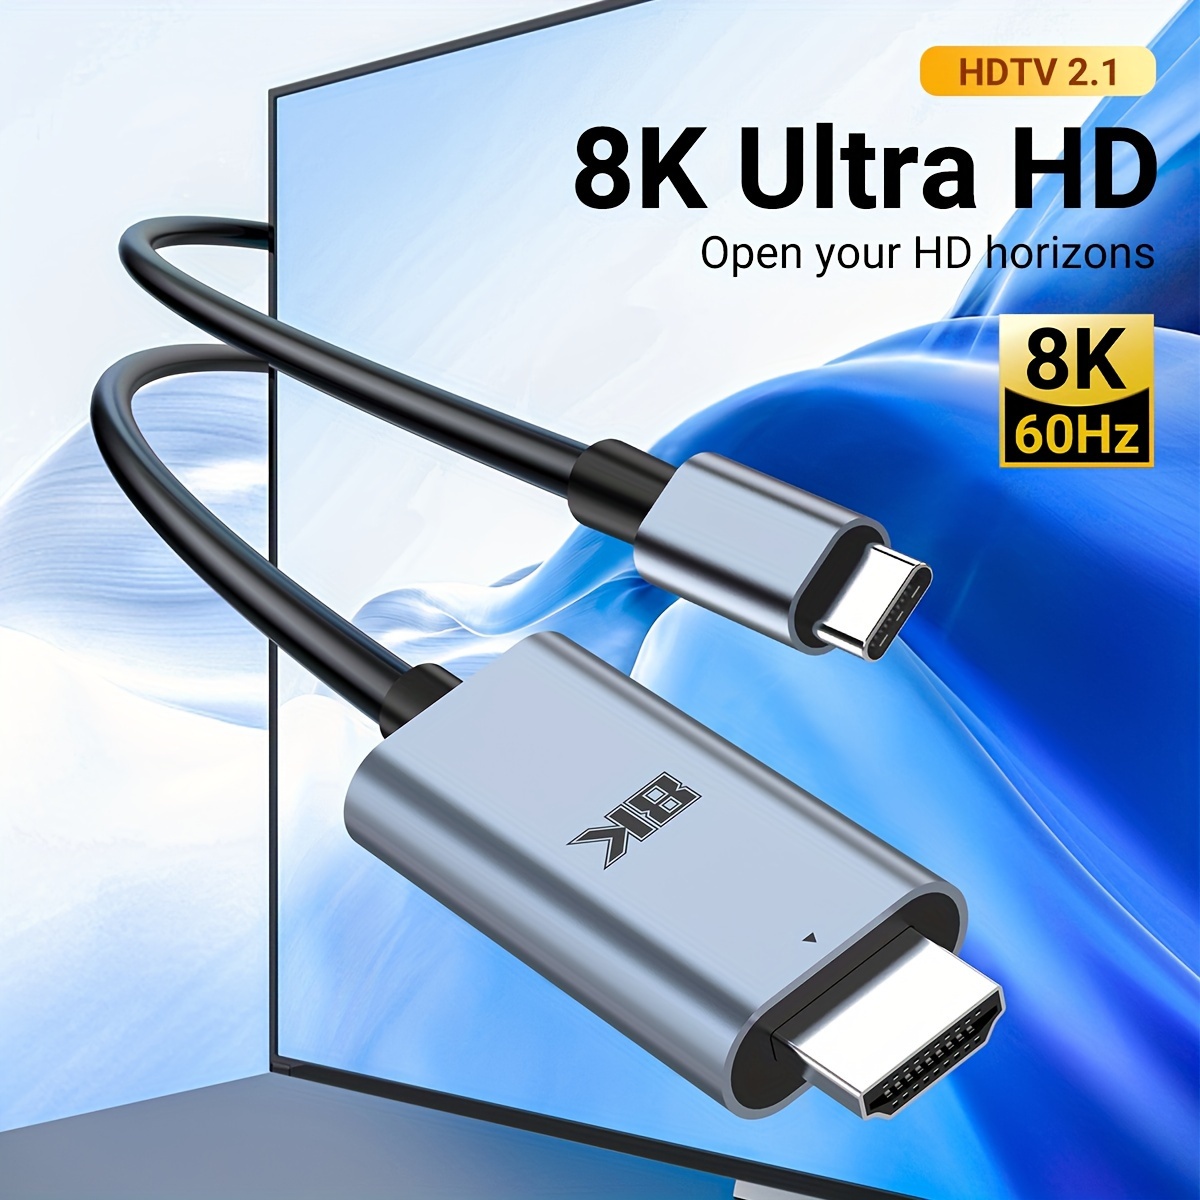 uni USB C to HDMI Cable 3FT 4K@30Hz, USB Type C to HDMI Cable for Home  Office, [Thunderbolt 3/4 Compatible] with MacBook Pro/Air, iPhone 15  Pro/Max